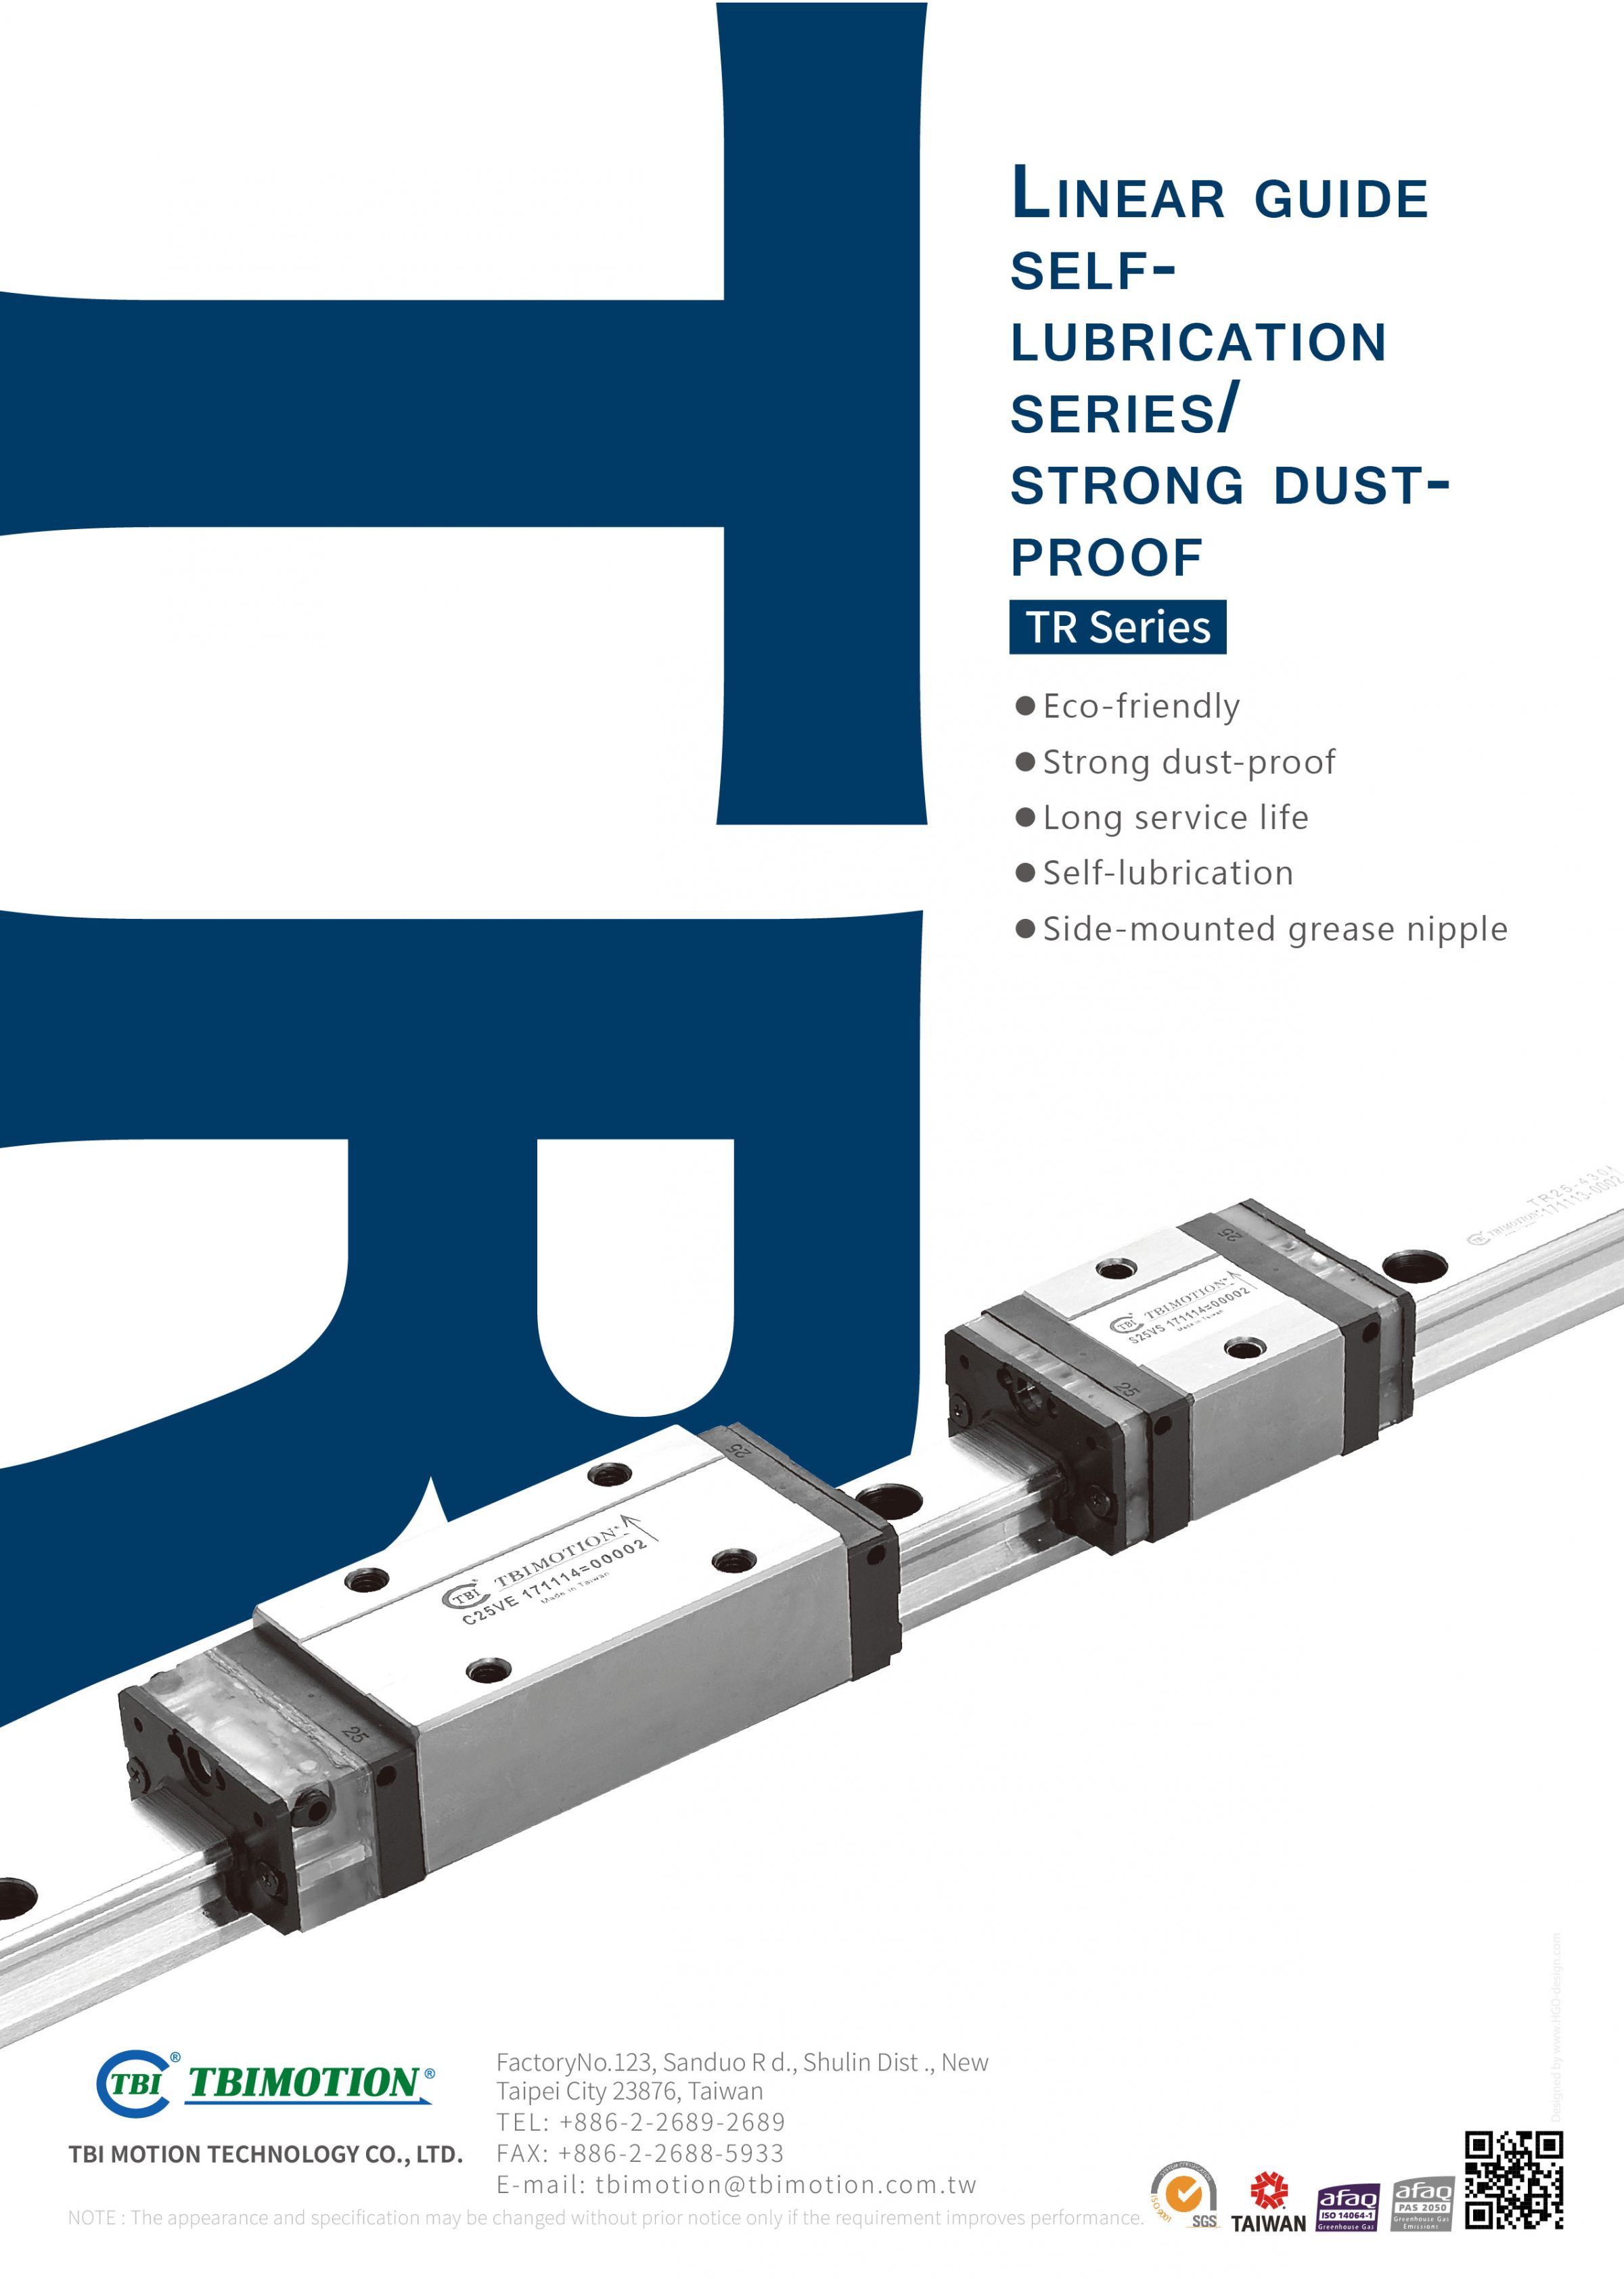 Linear Guide Self-lubrication Series Strong Dust-Proof